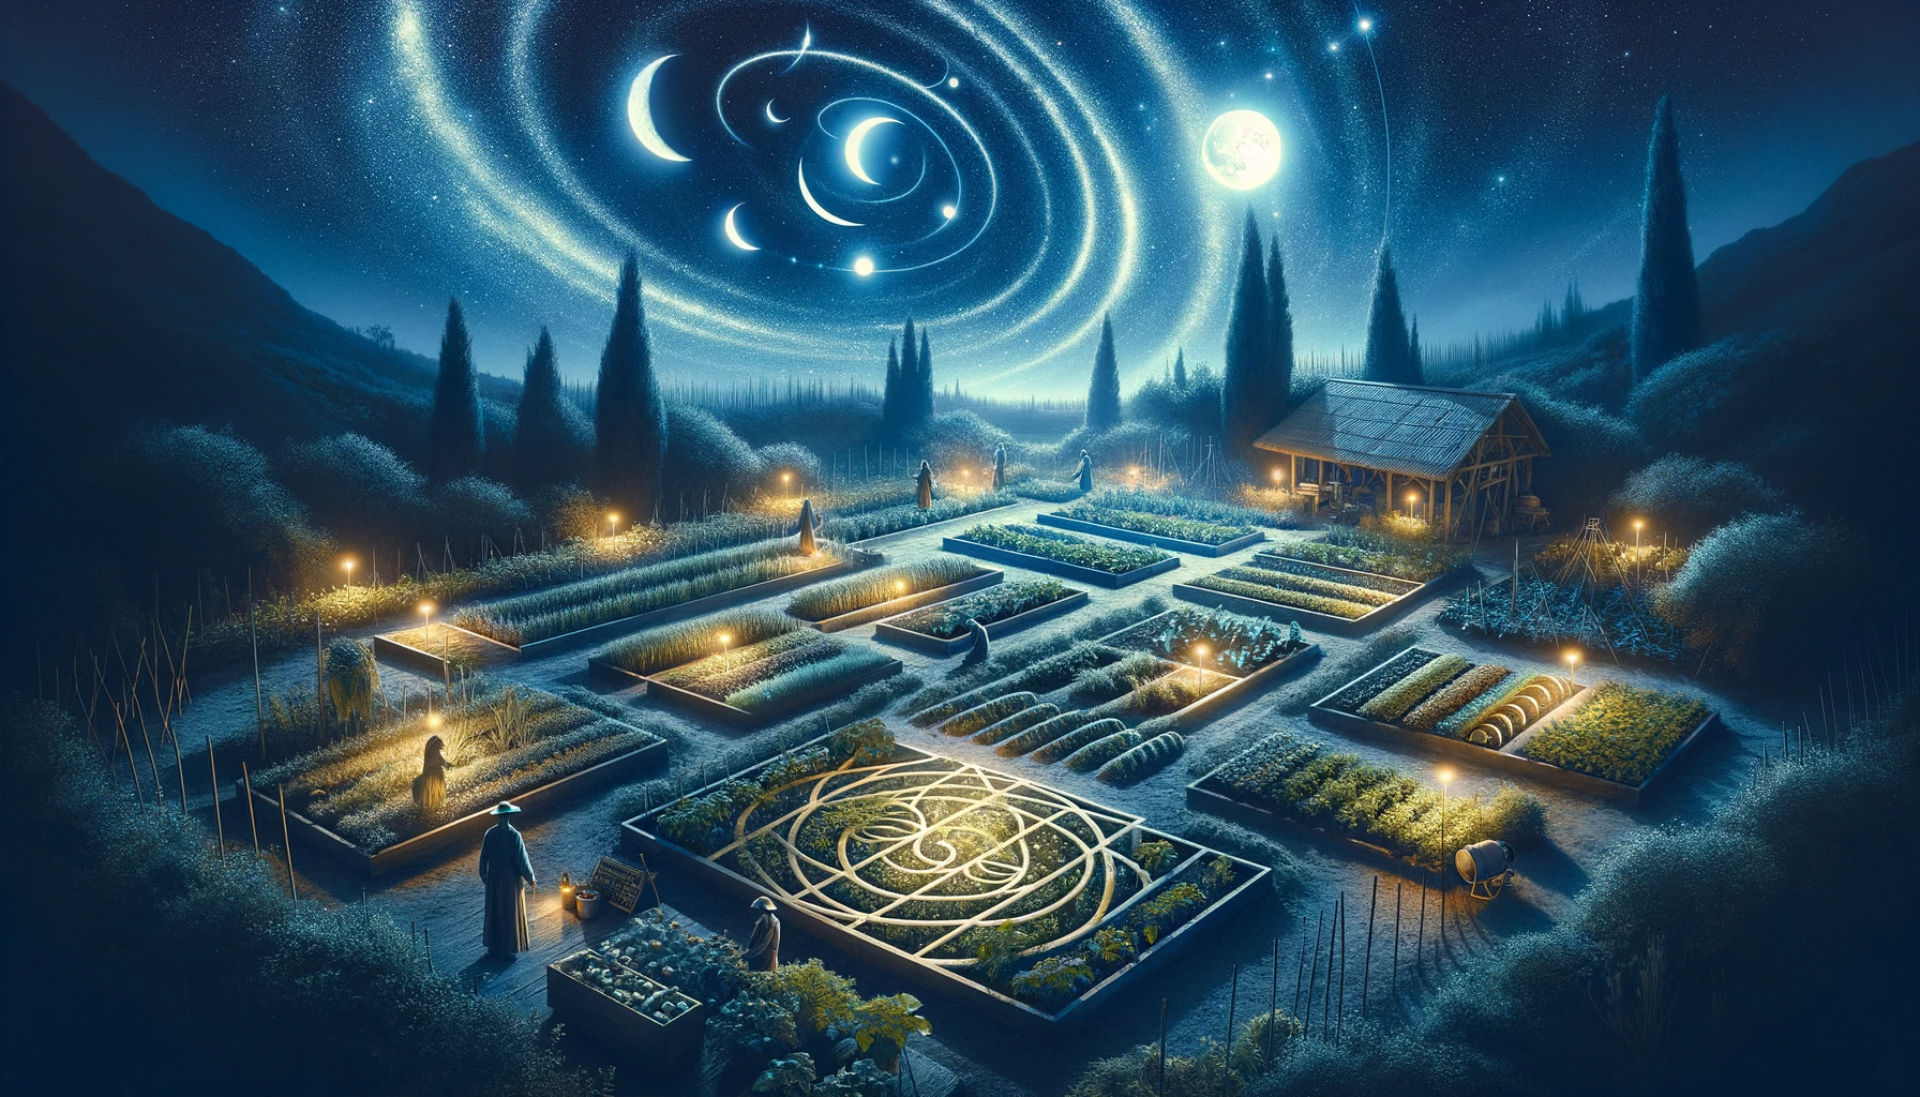 The Cosmic Connection: The third image illustrates the mystical aspect of biodynamic gardening, showing a night scene in a garden under a starry sky. This image captures the profound connection between the cosmos and biodynamic practices, emphasizing the influence of lunar and solar patterns on gardening activities.